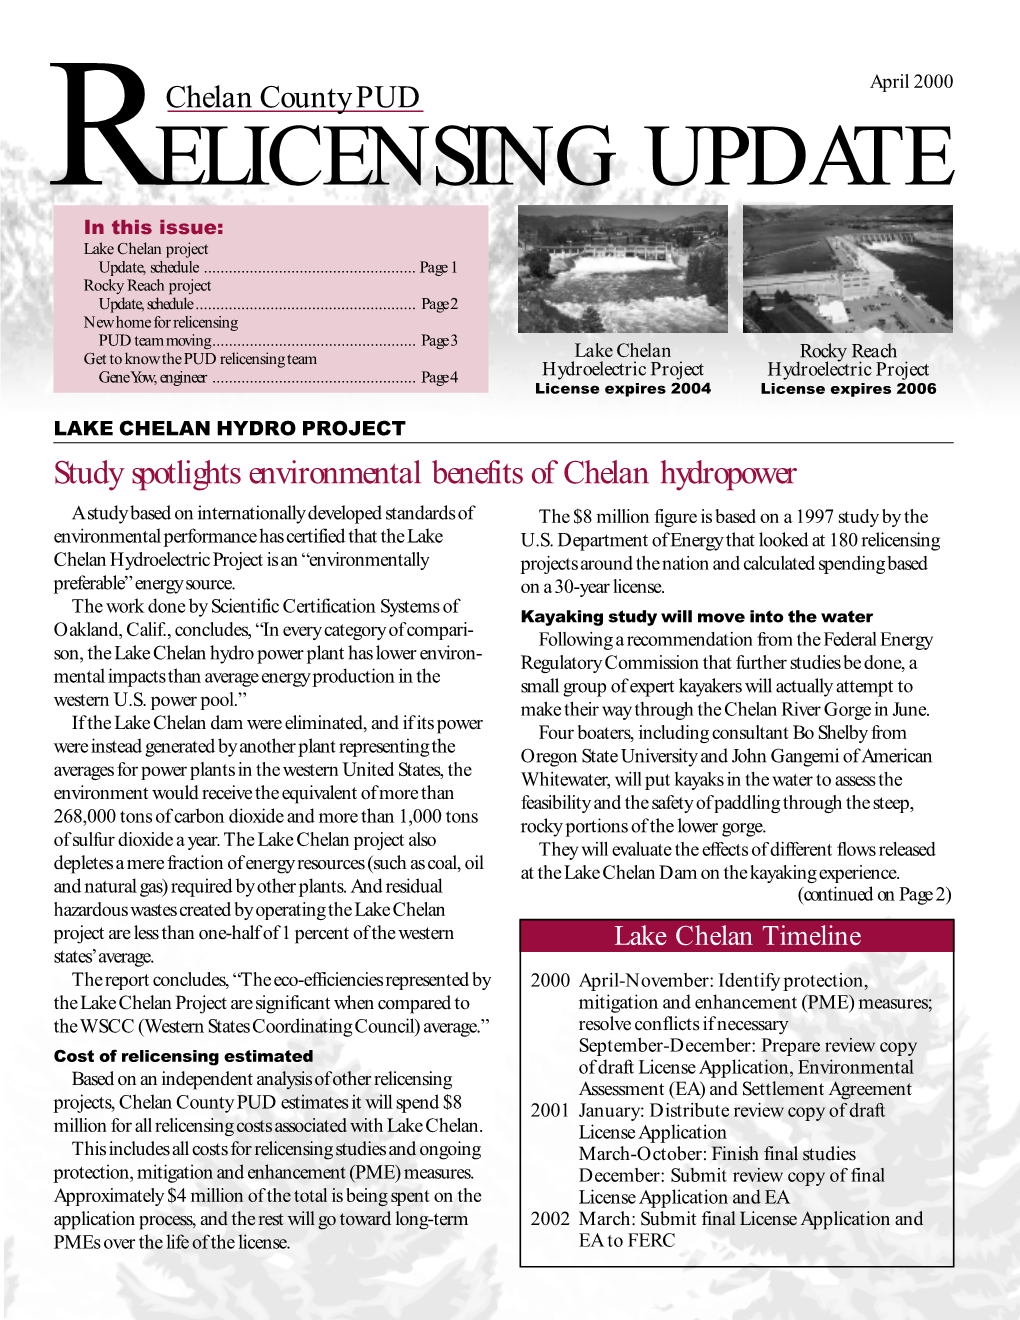 RELICENSING UPDATE in This Issue: Lake Chelan Project Update, Schedule